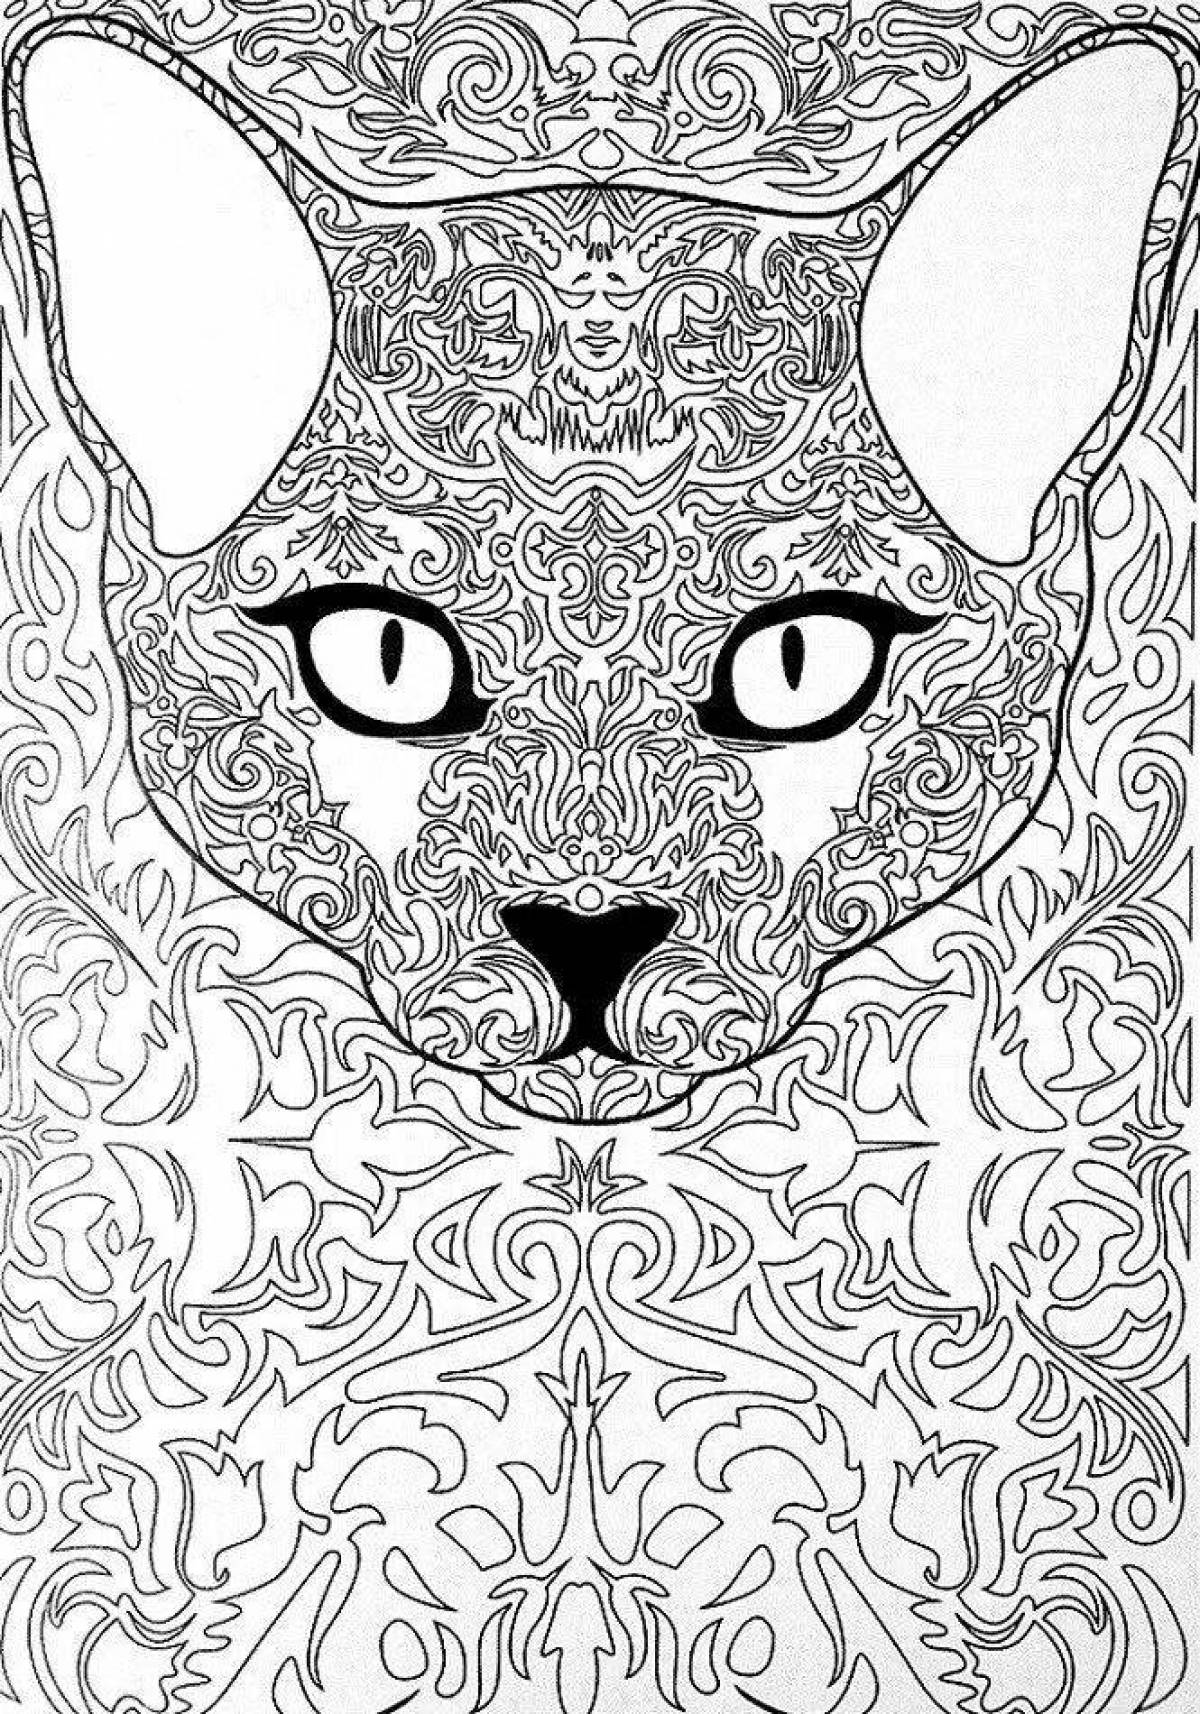 Joyous cat therapy antistress coloring book